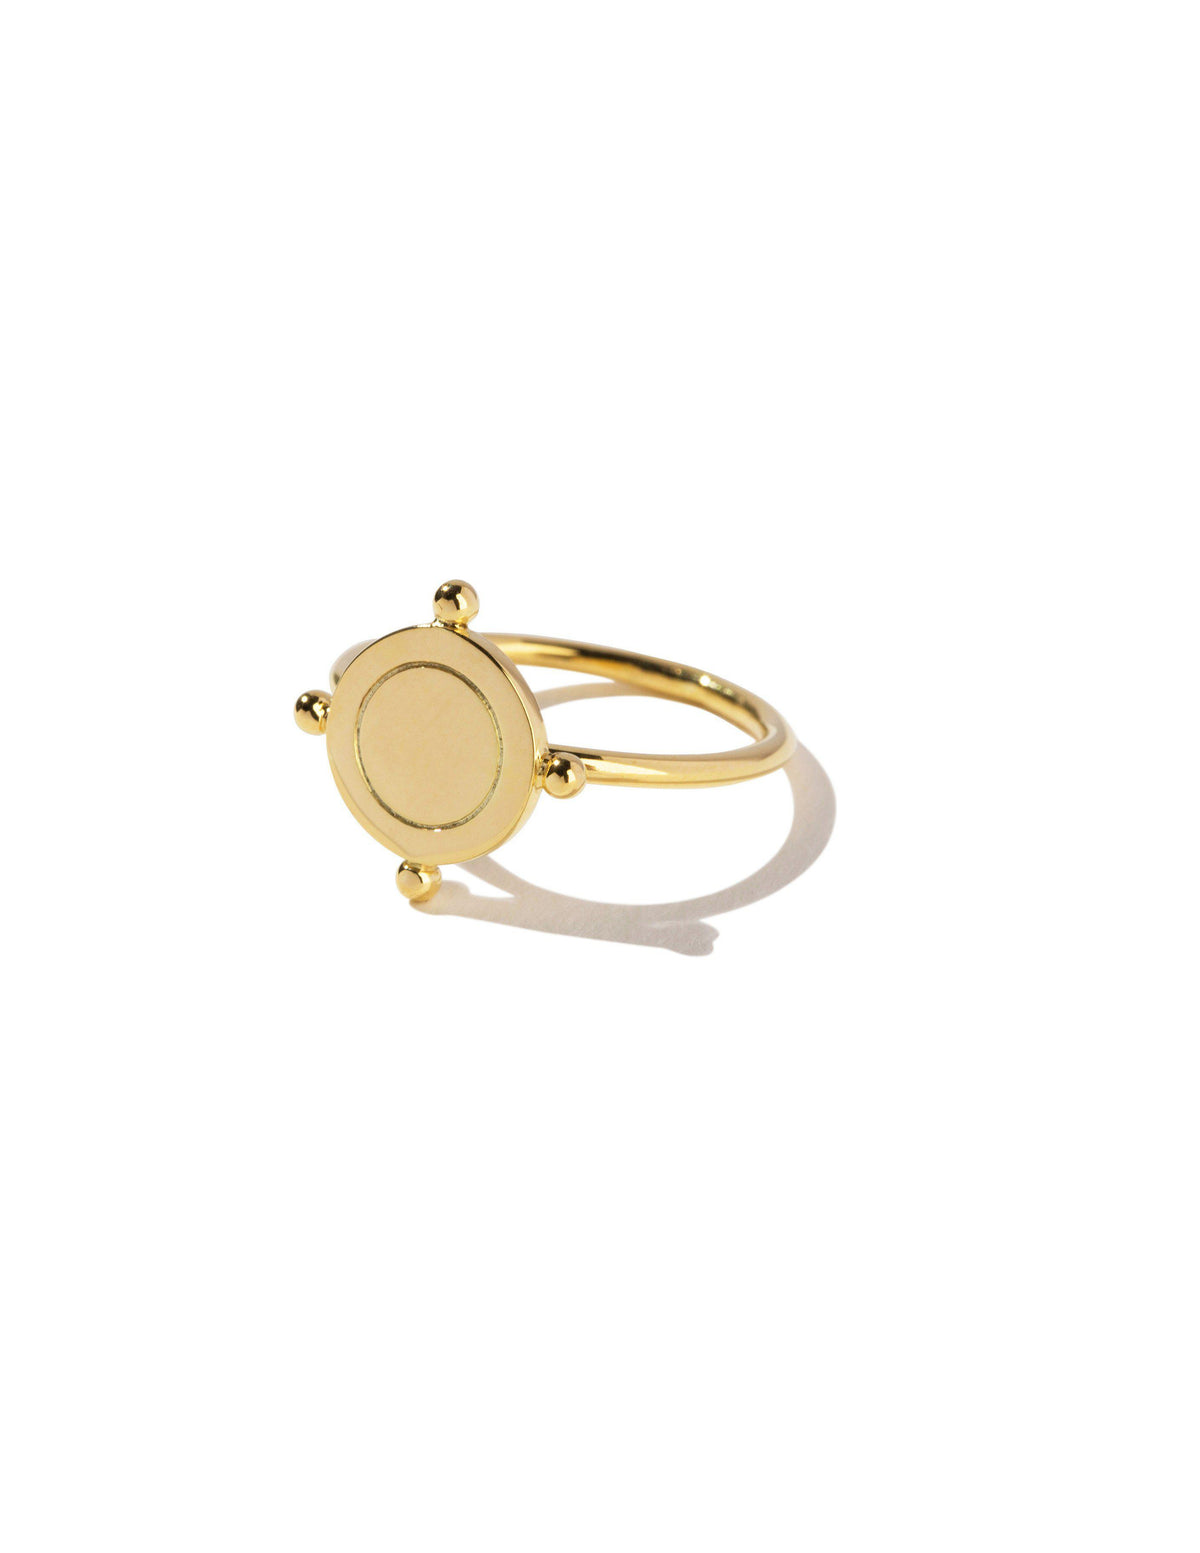 Blind Compass ring Solid gold - Overload Studios